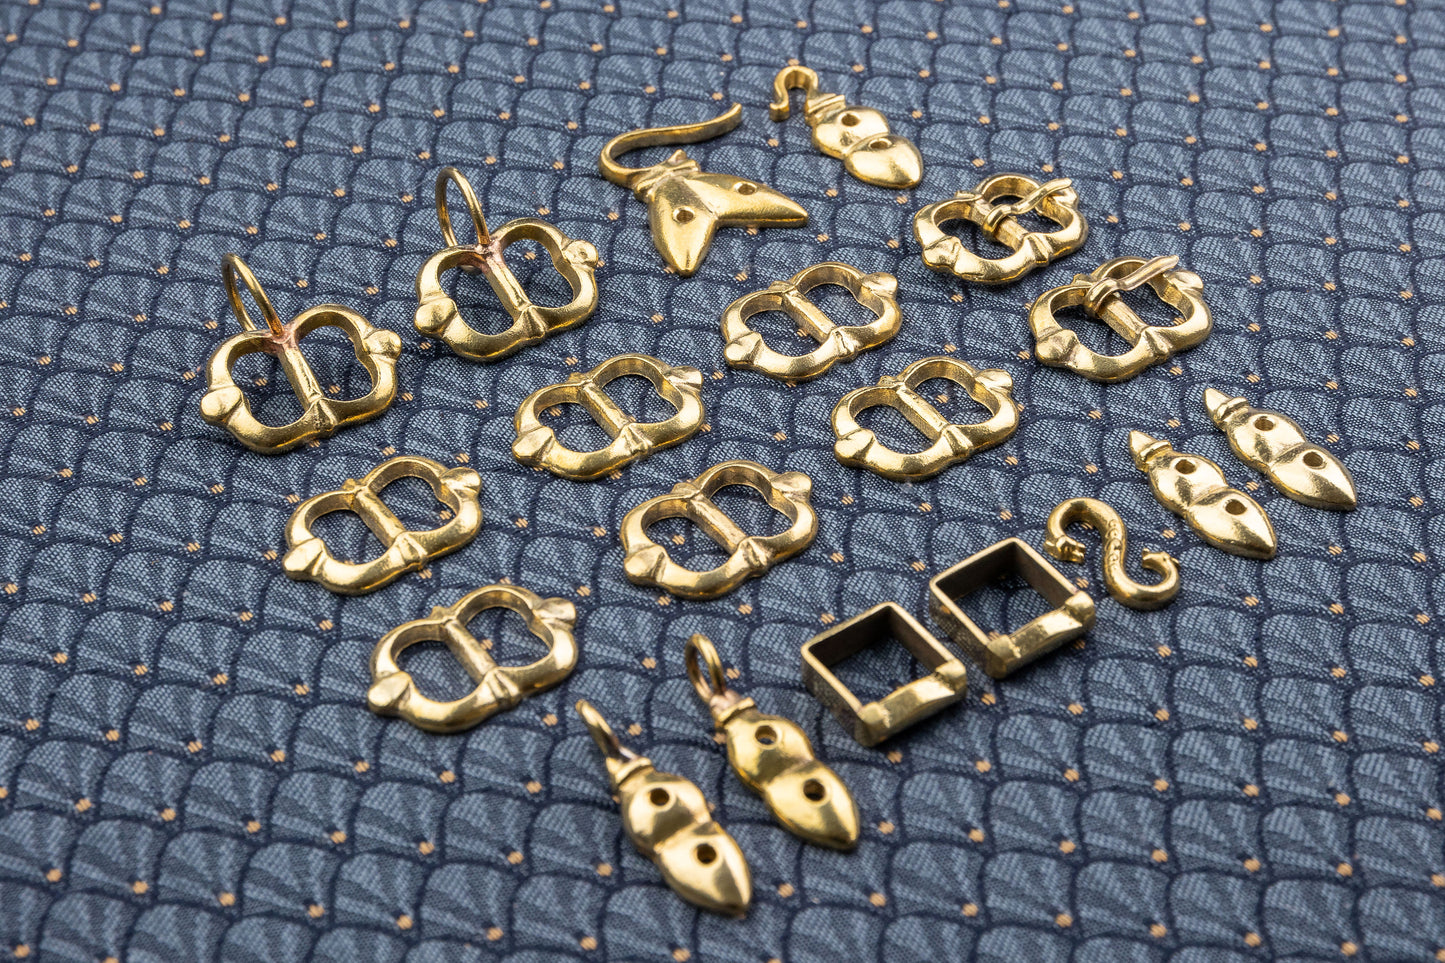 Brass or Silver Sliding Buckles with Loops for Rapier Belt Hangers